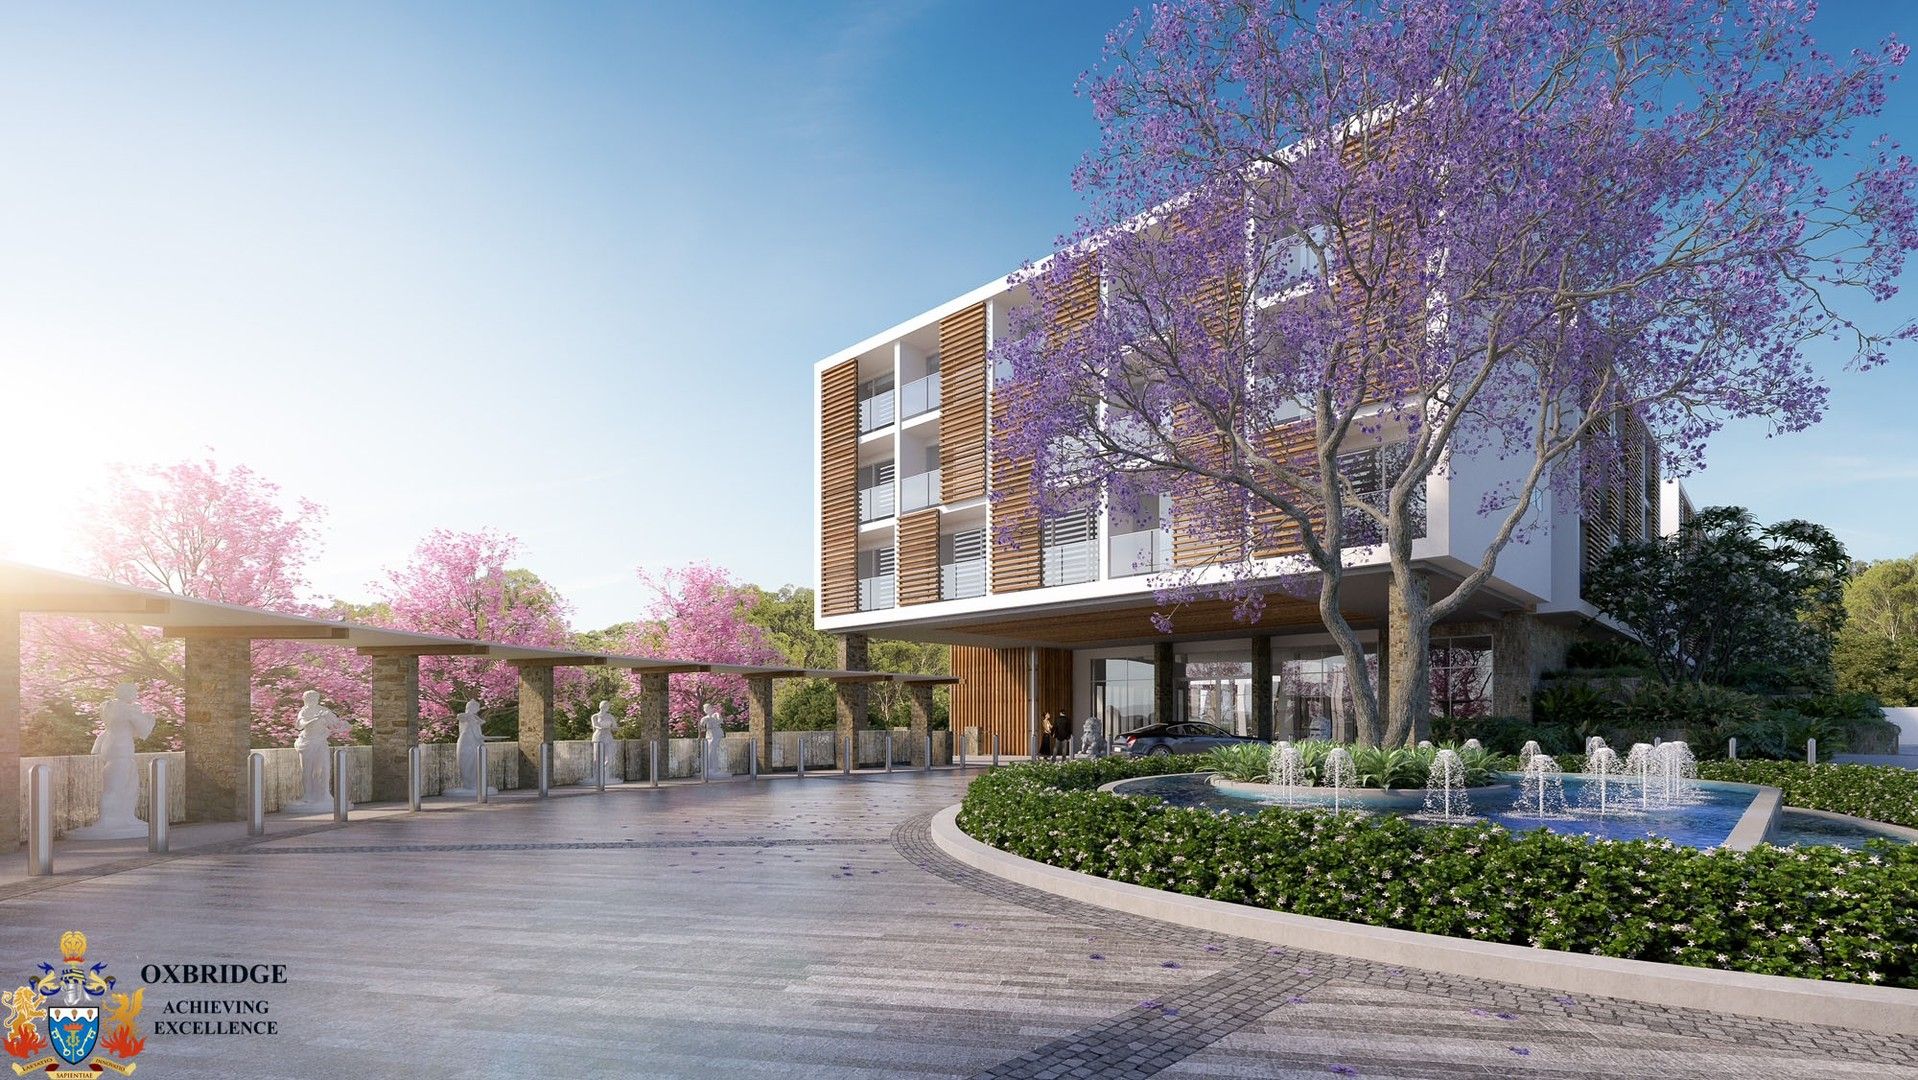 2 bedrooms New Apartments / Off the Plan in 170/486 Foxwell Road COOMERA QLD, 4209